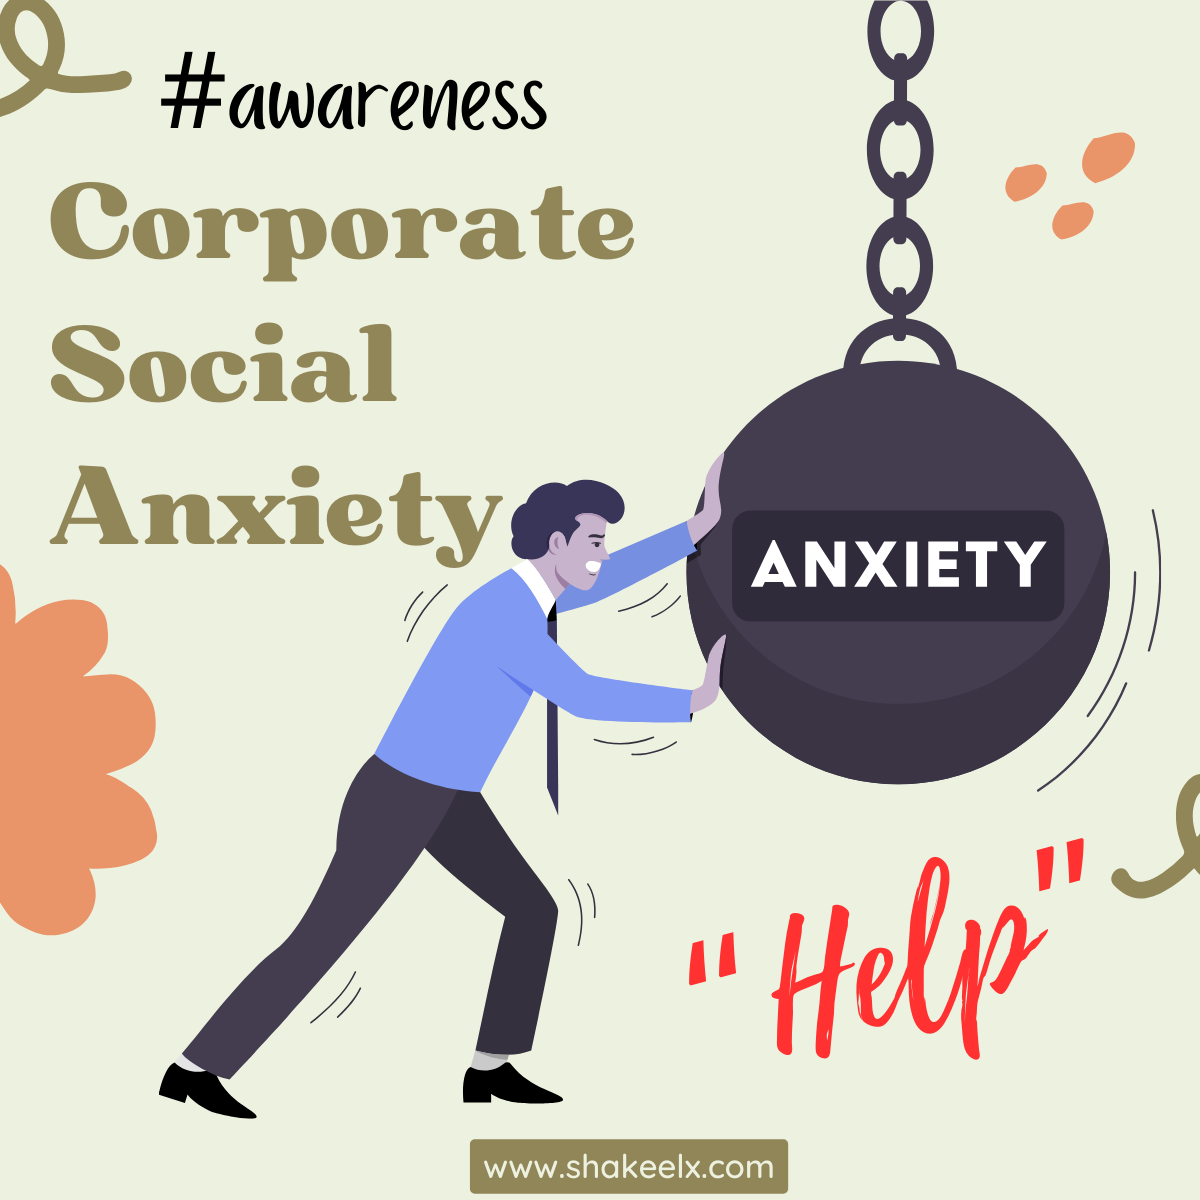 Corporate Social Anxiety